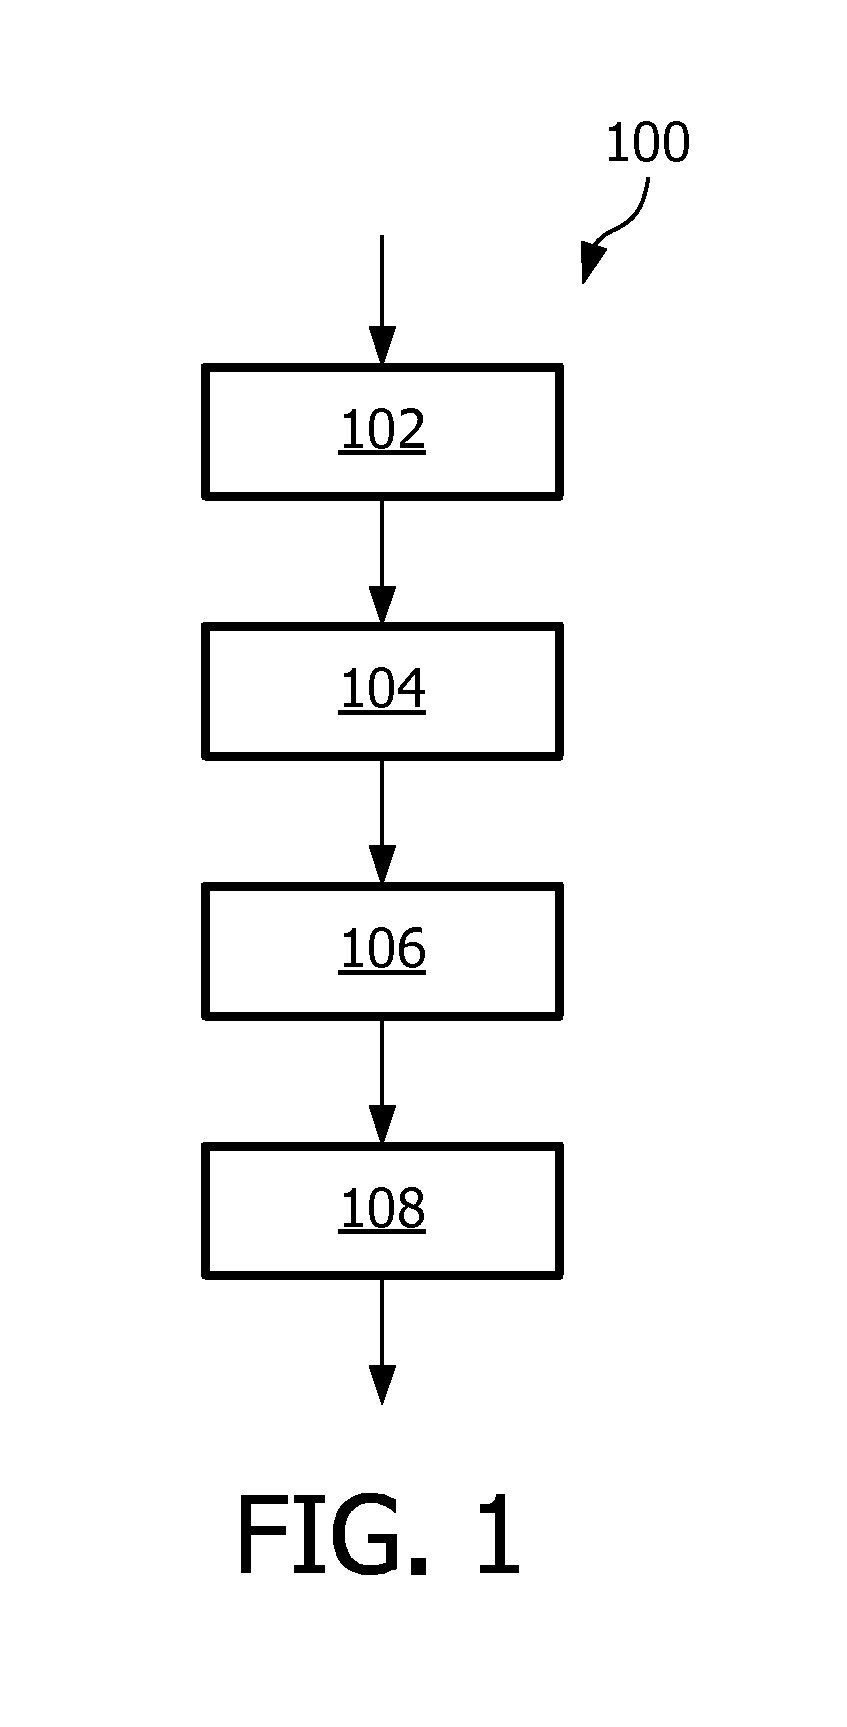 Method of controlling an outdoor lighting system, a computer program product, a controlling device and an outdoor lighting system